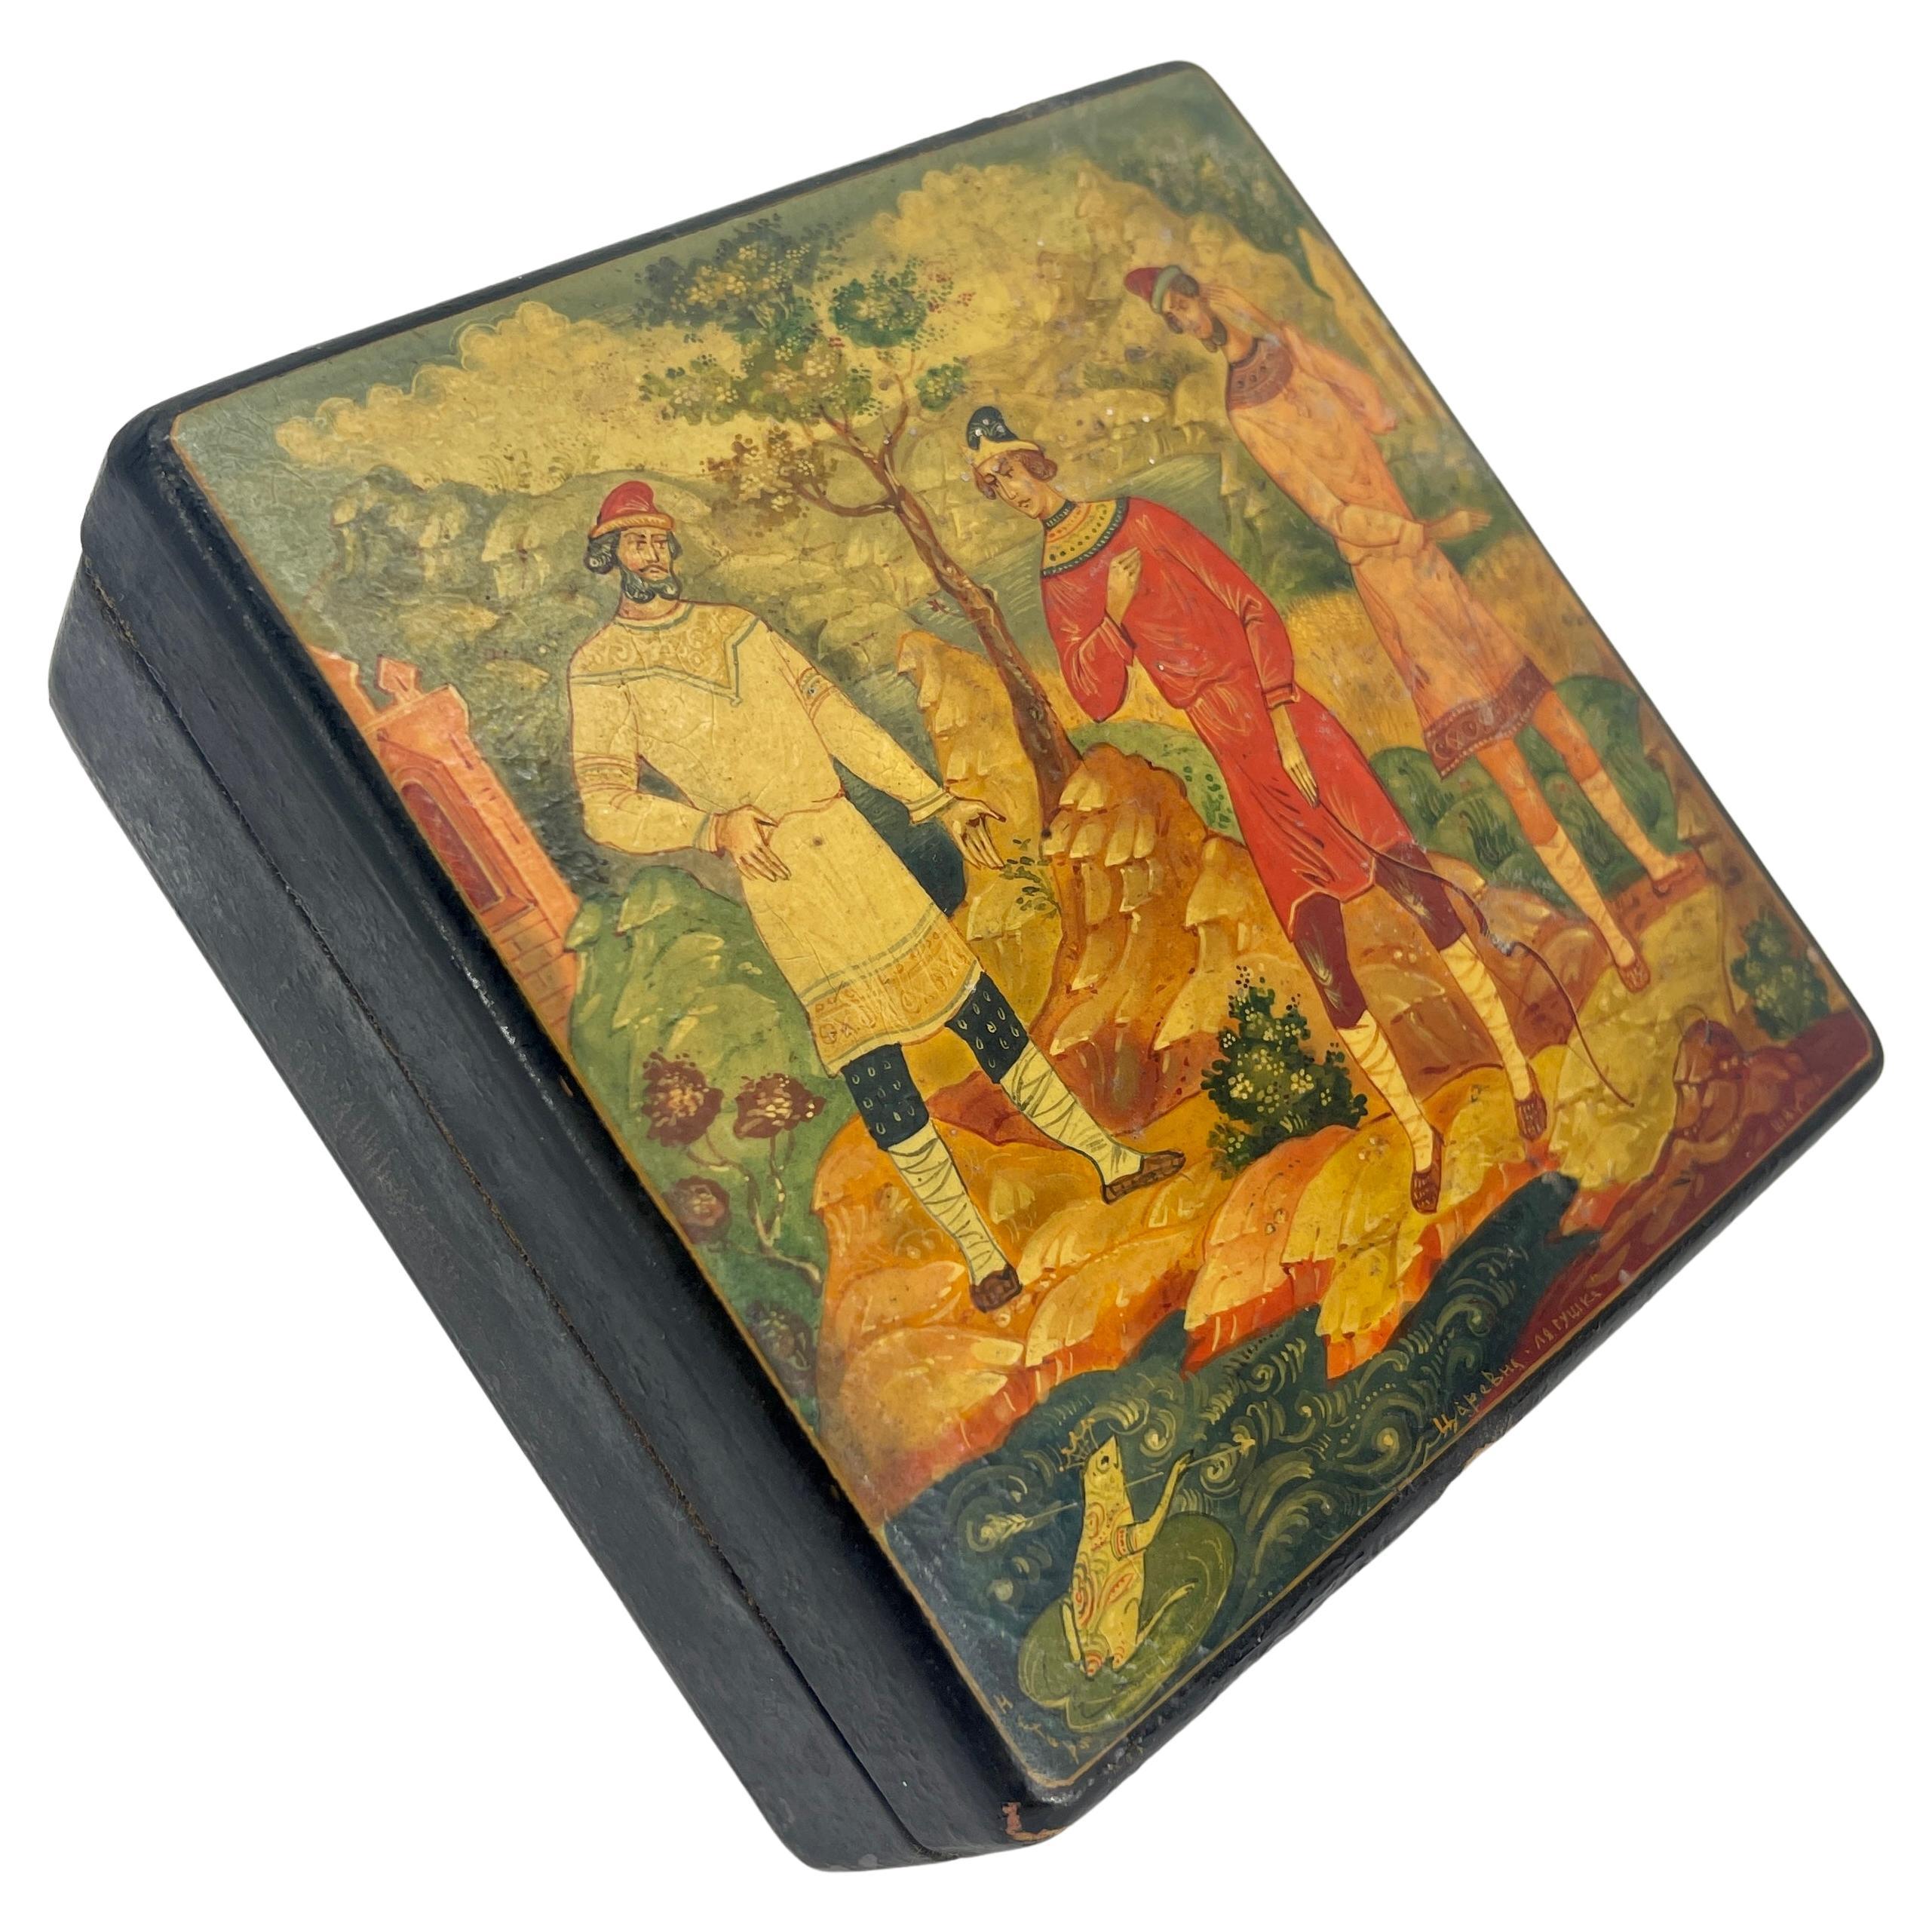 Rare Large Antique Russian Hand Painted Lacquered Wooden Box, Signed in Cyrillic.
This square two part box has two signature at the lower right side of the lid. The lid is beautifully hand painted in polychrome illustration of 3 adult men looking at